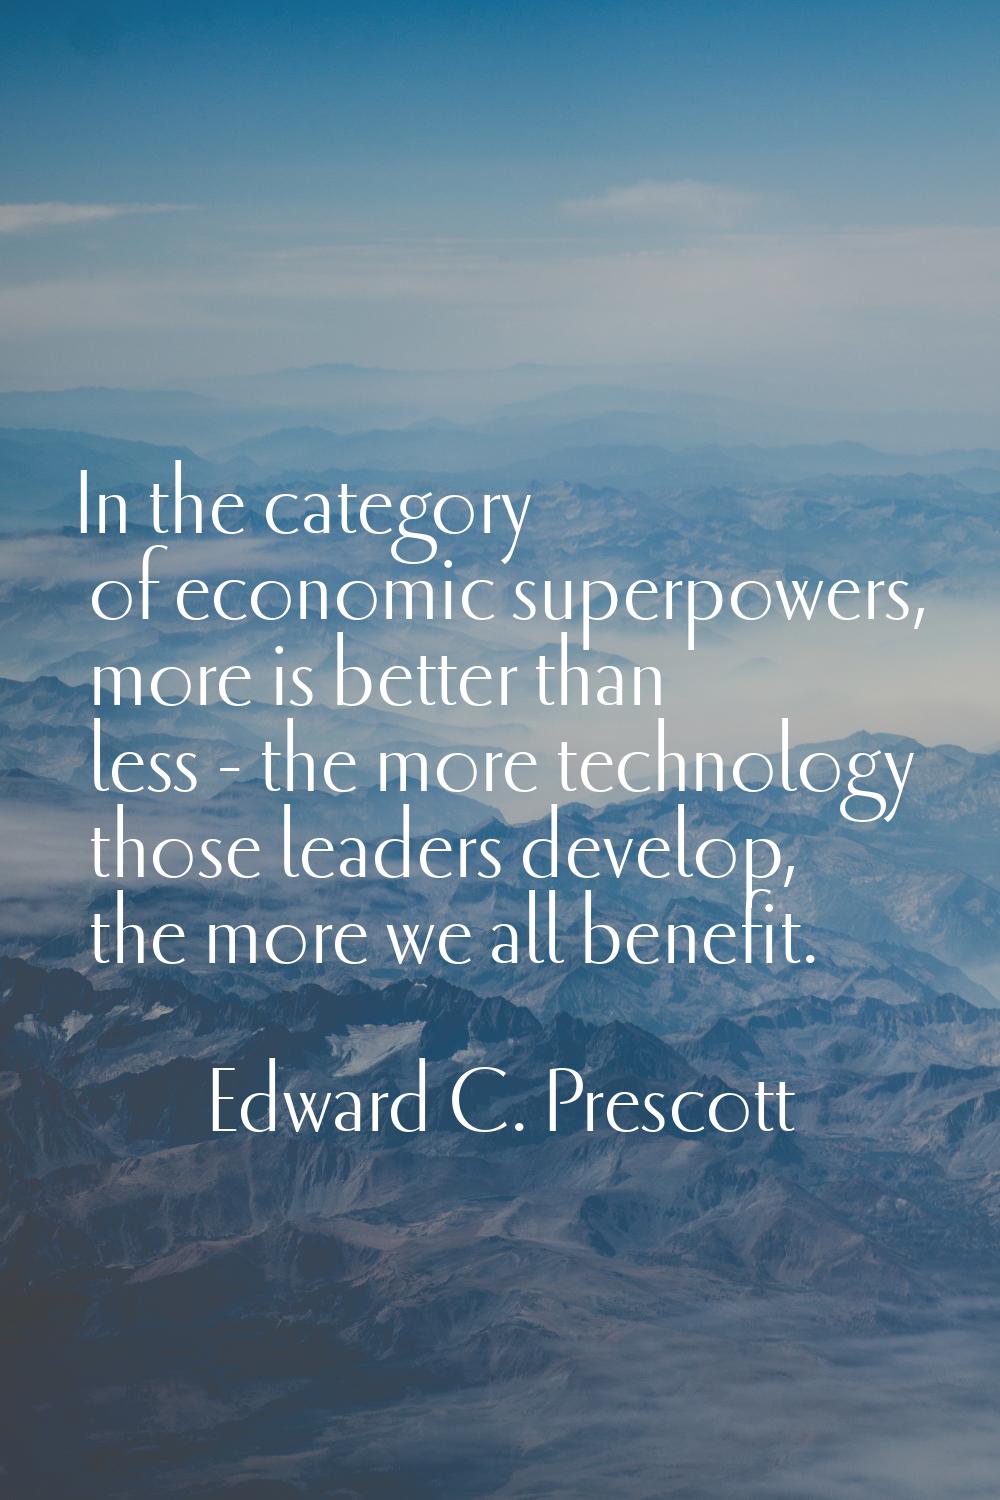 In the category of economic superpowers, more is better than less - the more technology those leade